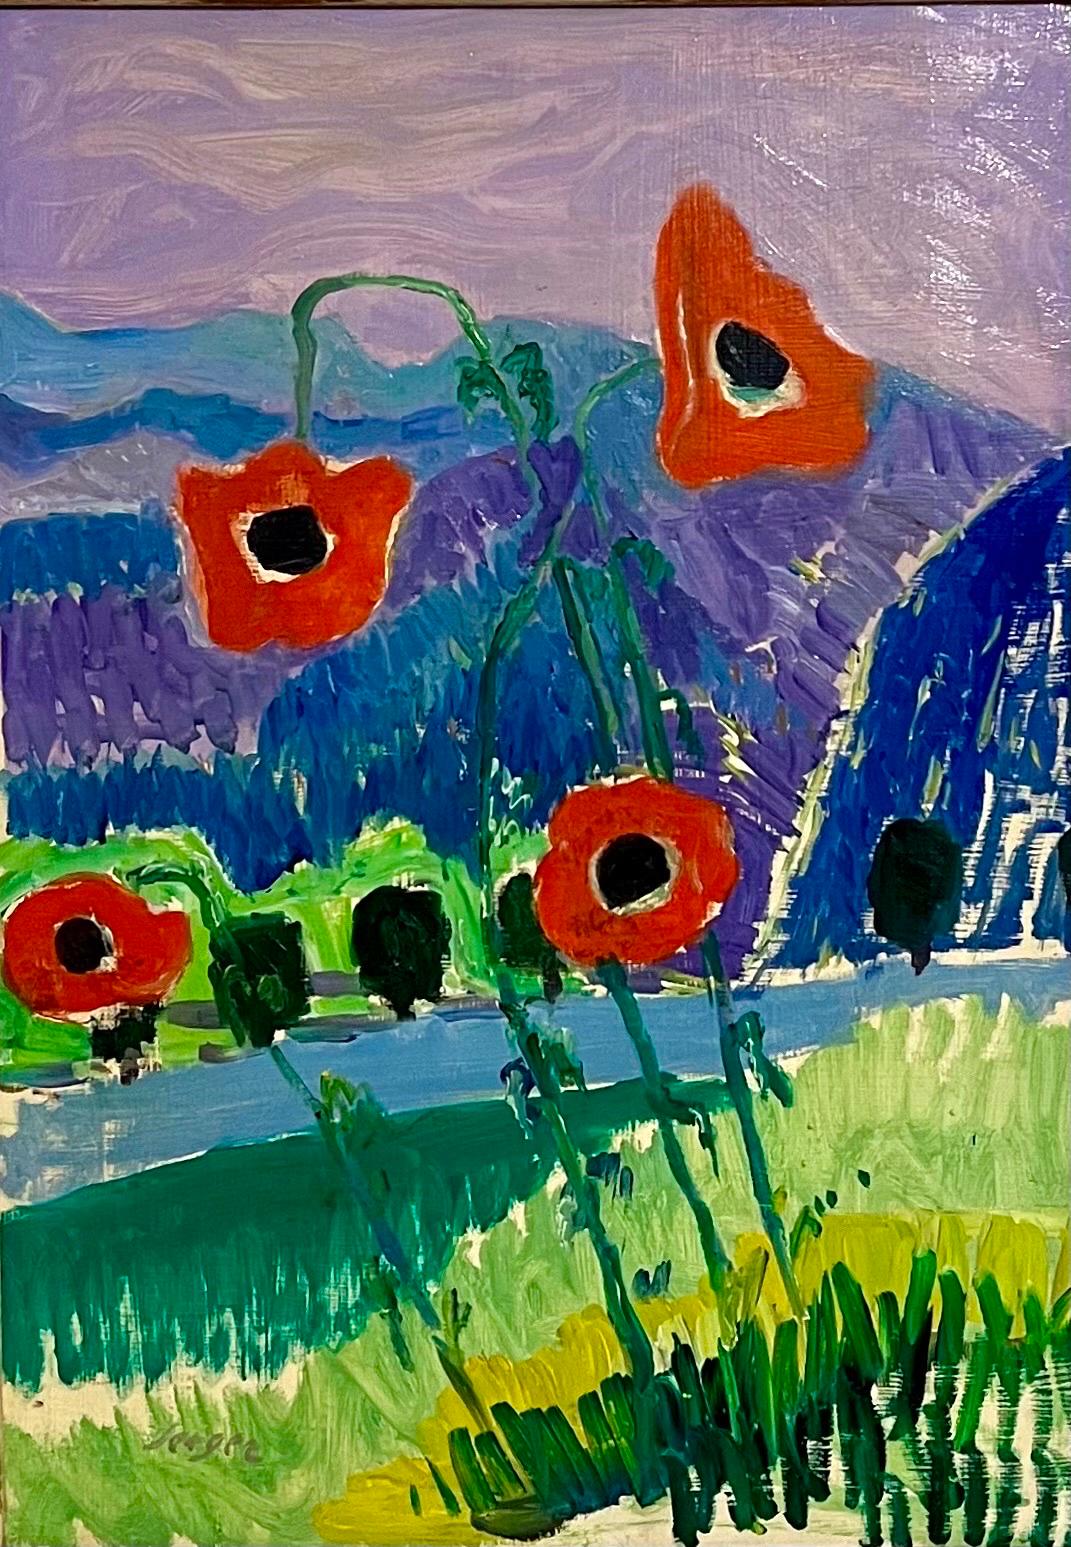 
Frederick Serger 
Genre: Post Impressionist
Subject: Flowers, Poppies
Medium: Oil
Surface: Panel


Frederick Serger (given name Frederick Bedrick Sinaberger) was born in 1889 to a family of Jewish manufacturers in the village of Ivancice near Brno